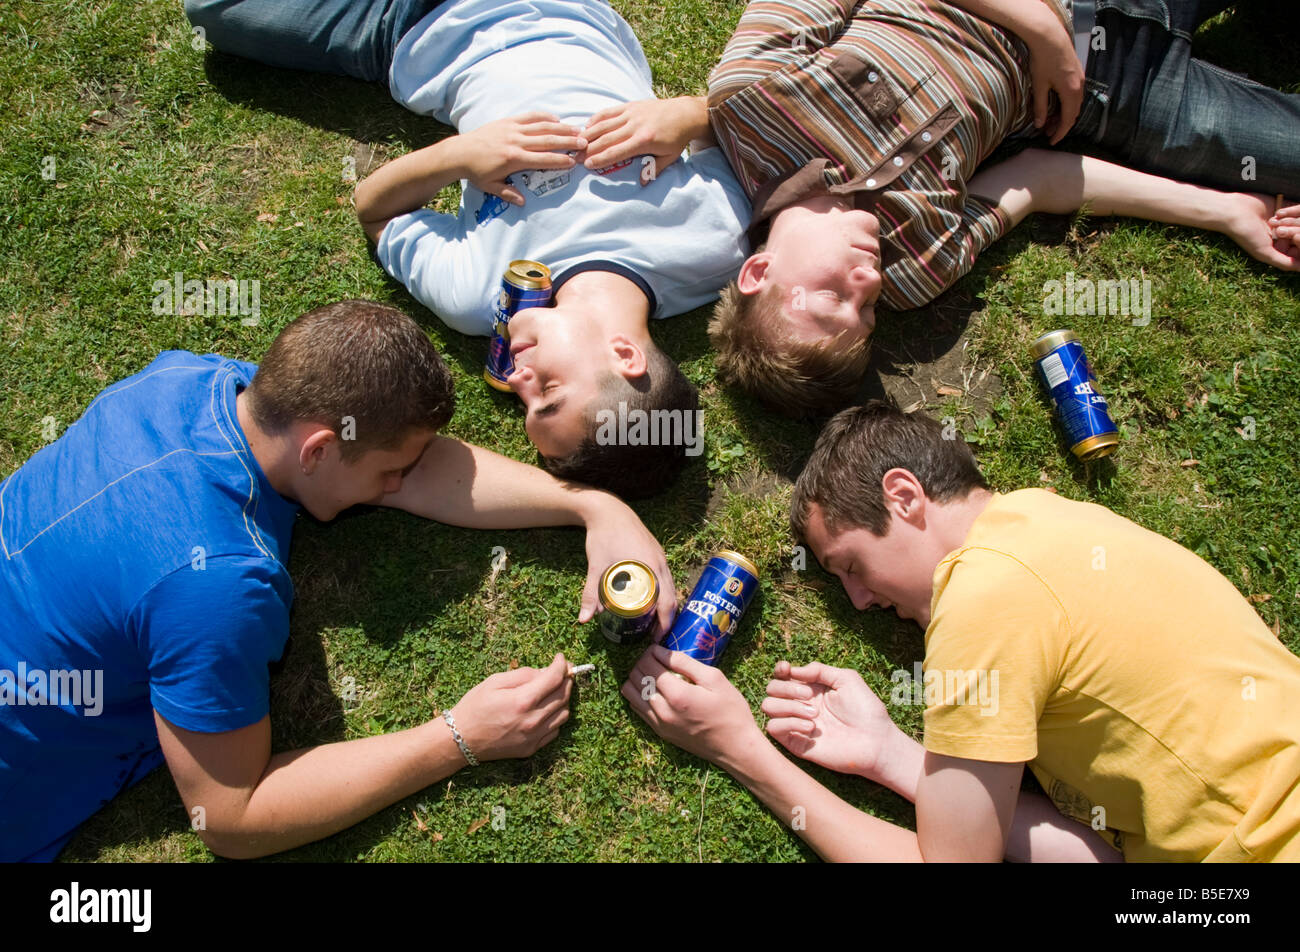 group-of-teenage-boys-who-have-passed-out-on-the-ground-surrounded-B5E7X9.jpg